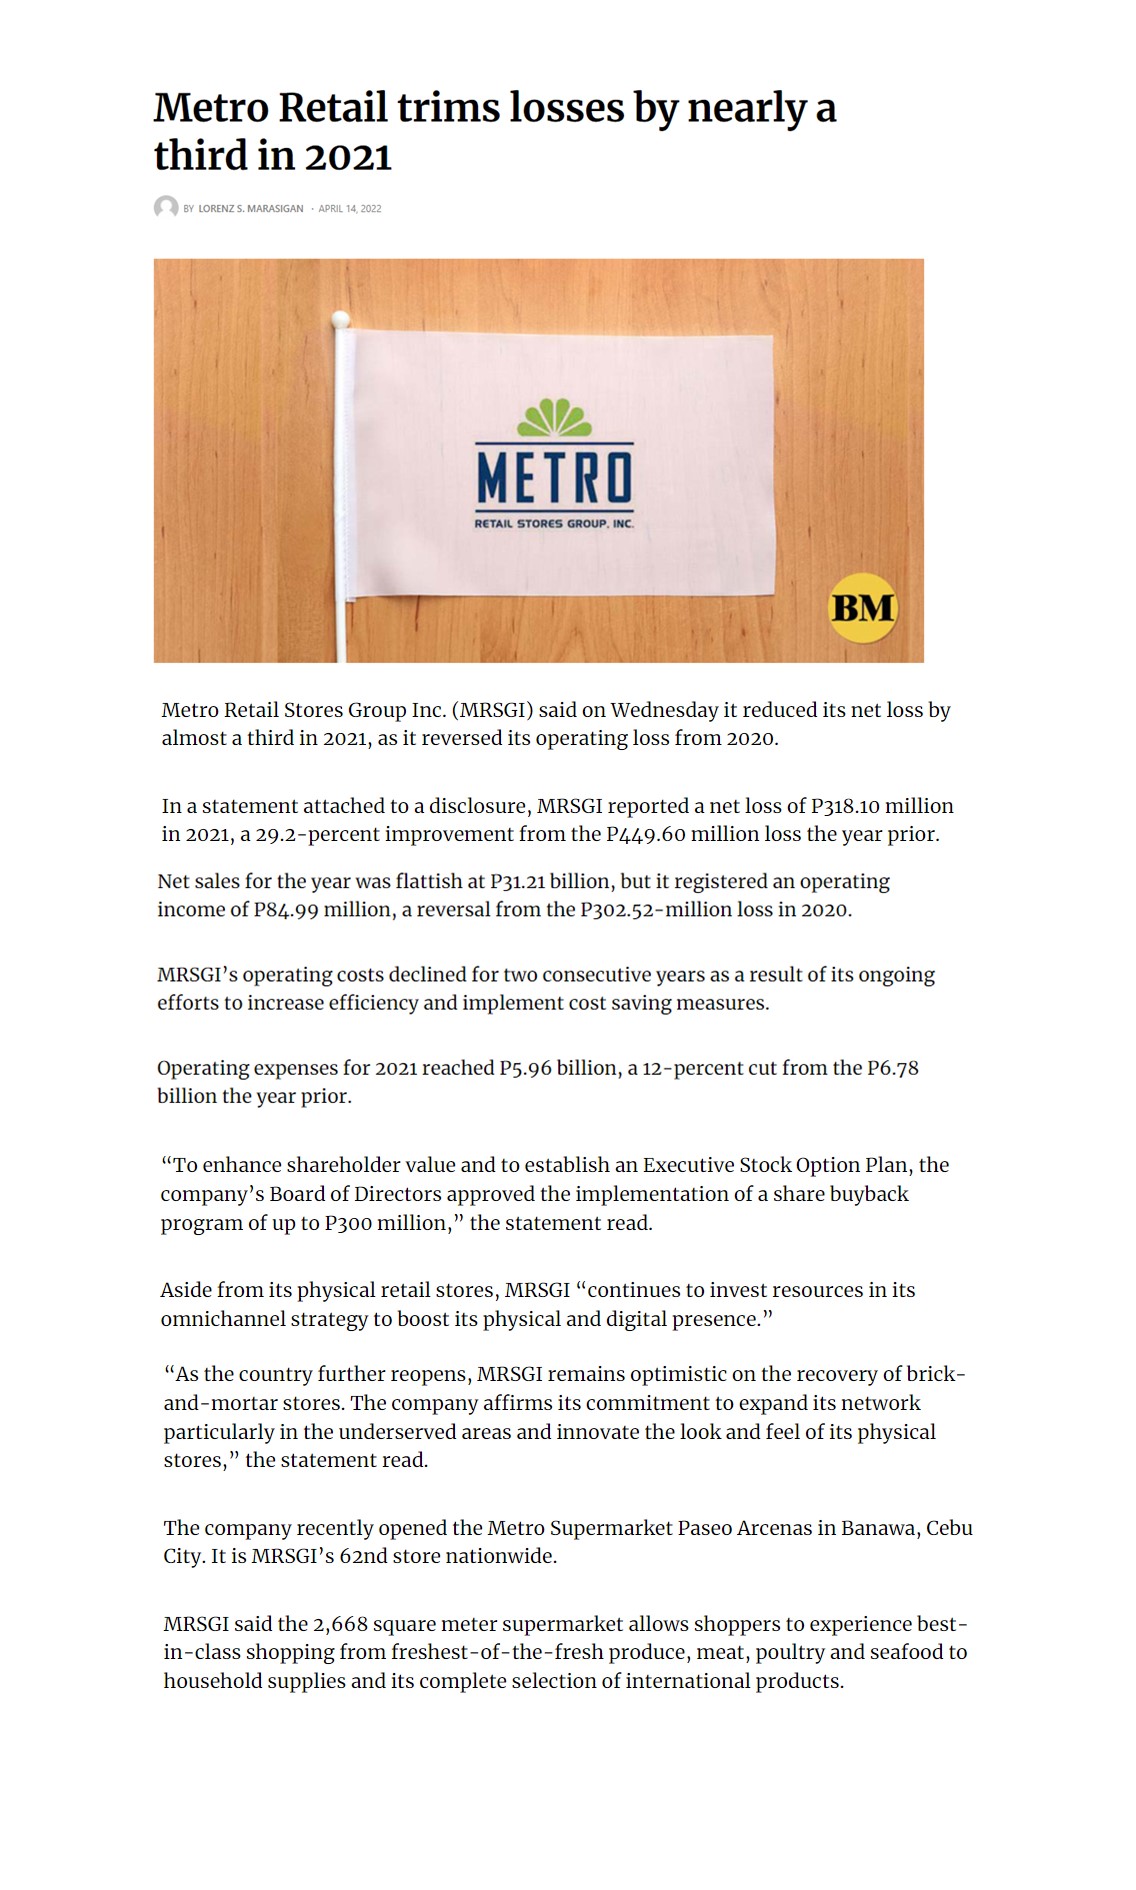 Metro Retail trims losses by nearly a third in 2021 Business Mirror